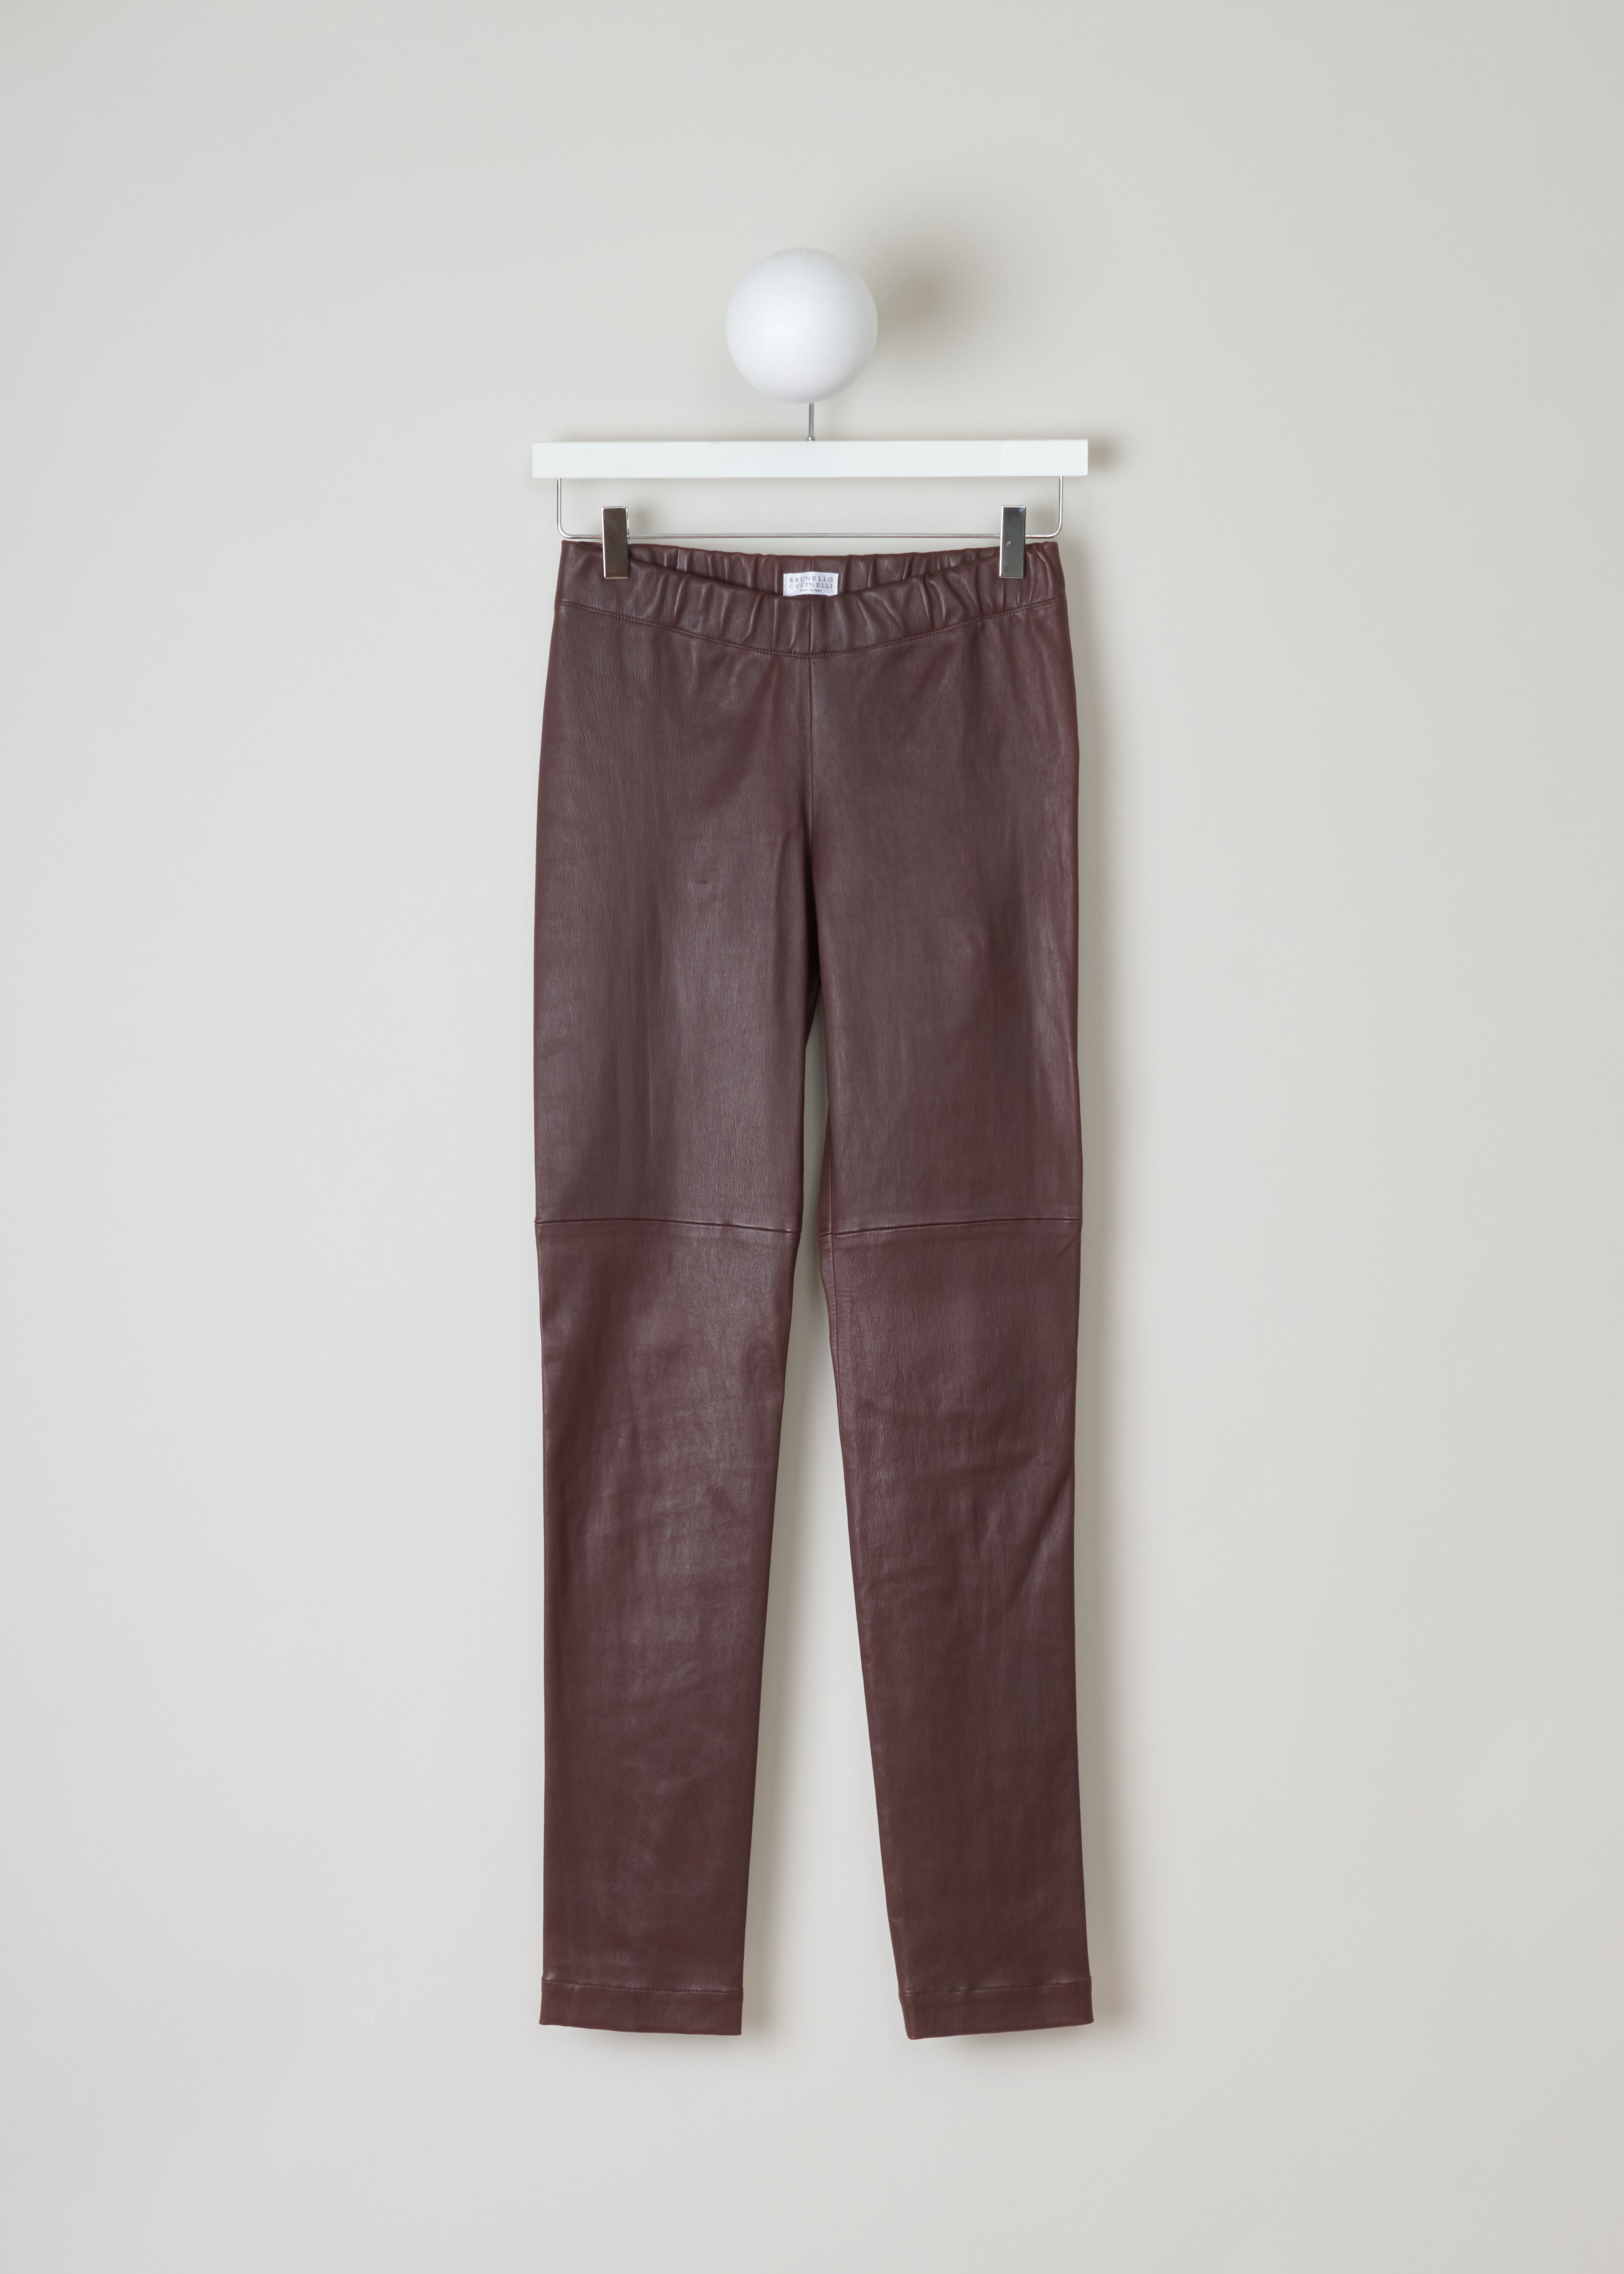 Brunello Cucinelli Elasticated leather Burgundy pants, M0V29P1329_C2630 burgundy front. Fitted leather pants with a light stretch in it has an ankle-length and an elastic waistband.